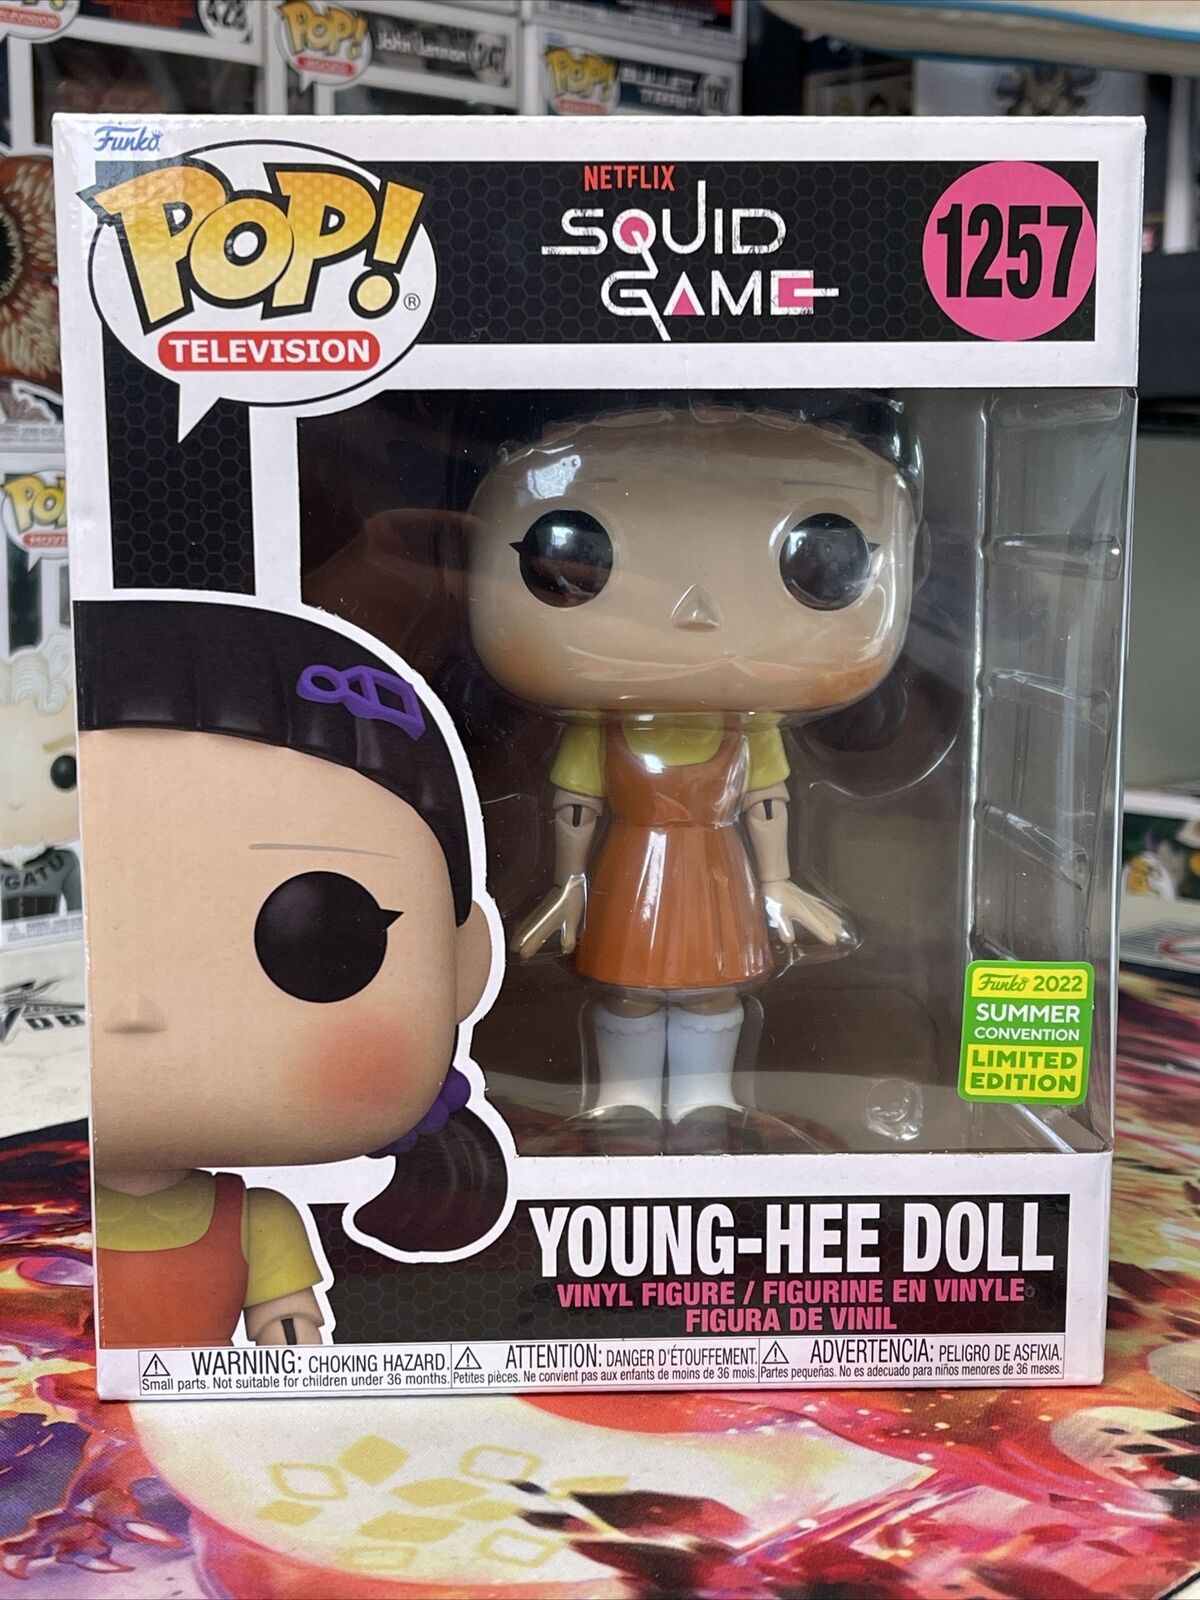 YOUNG-HEE DOLL NETFLIX SQUID GAME FUNKO POP #1257 SUMMER CONVENTION LE 6\